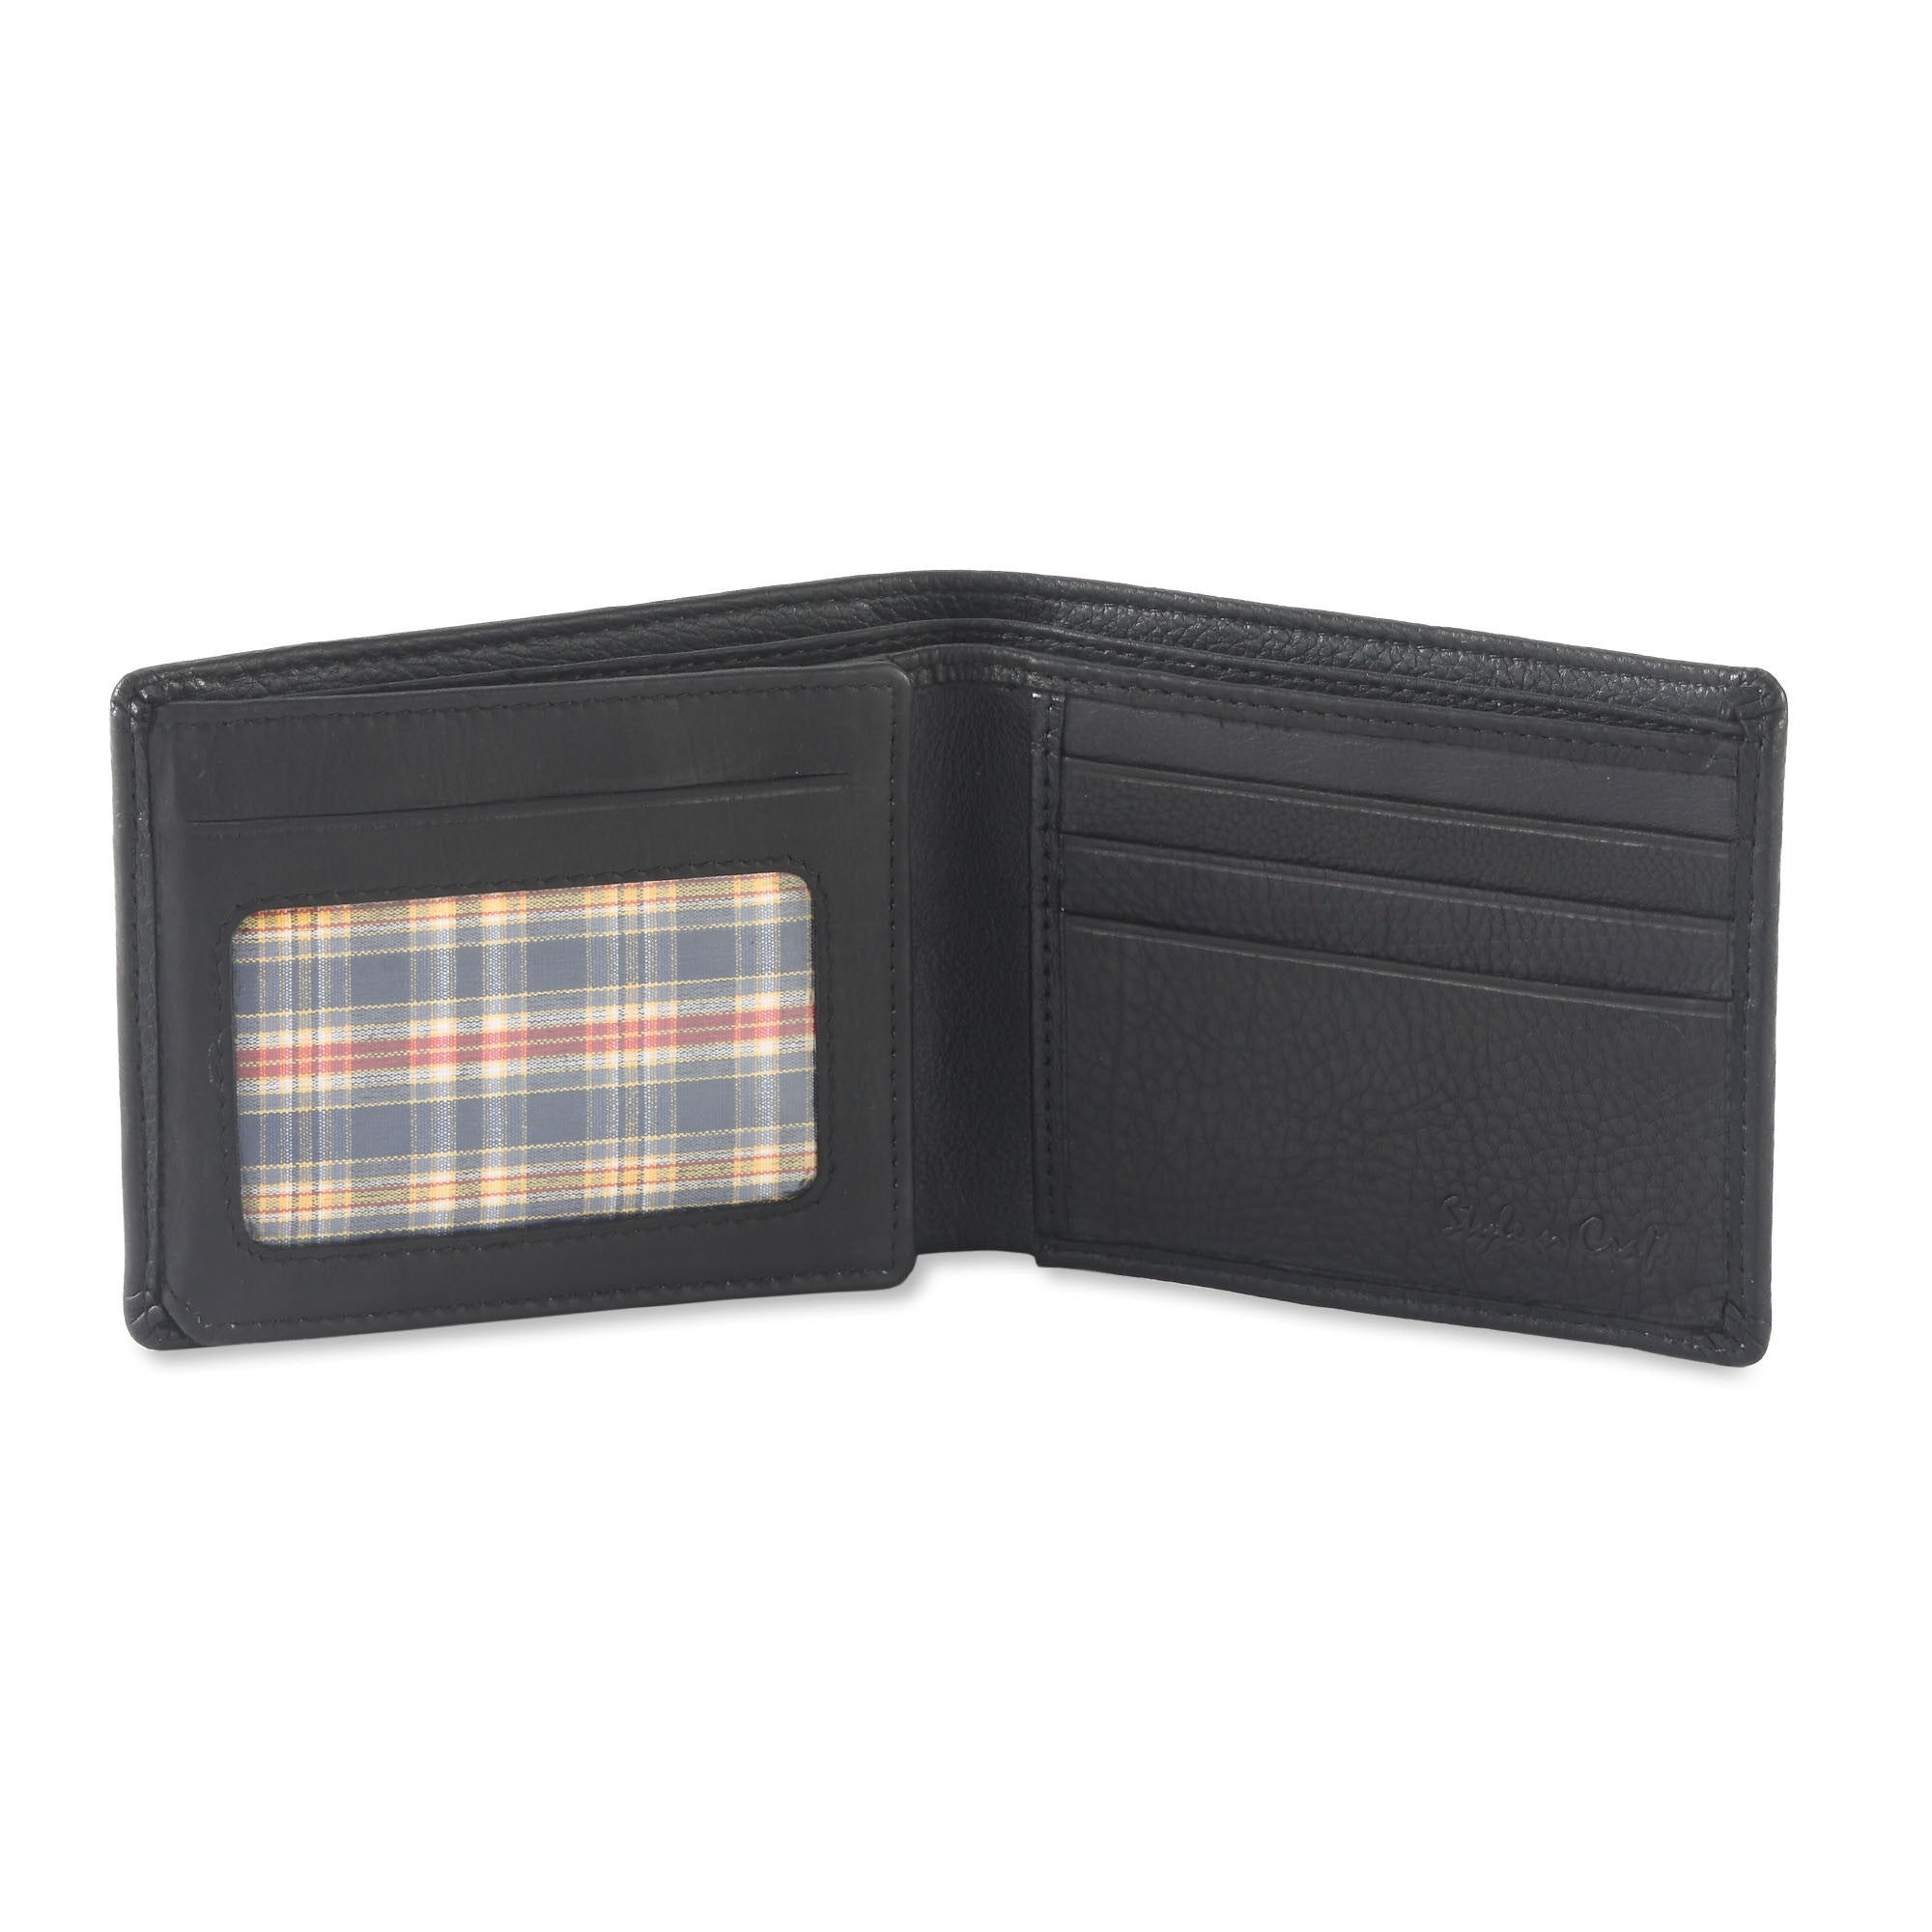 Black Bifold Leather Wallet with Side Flap | Style n Craft